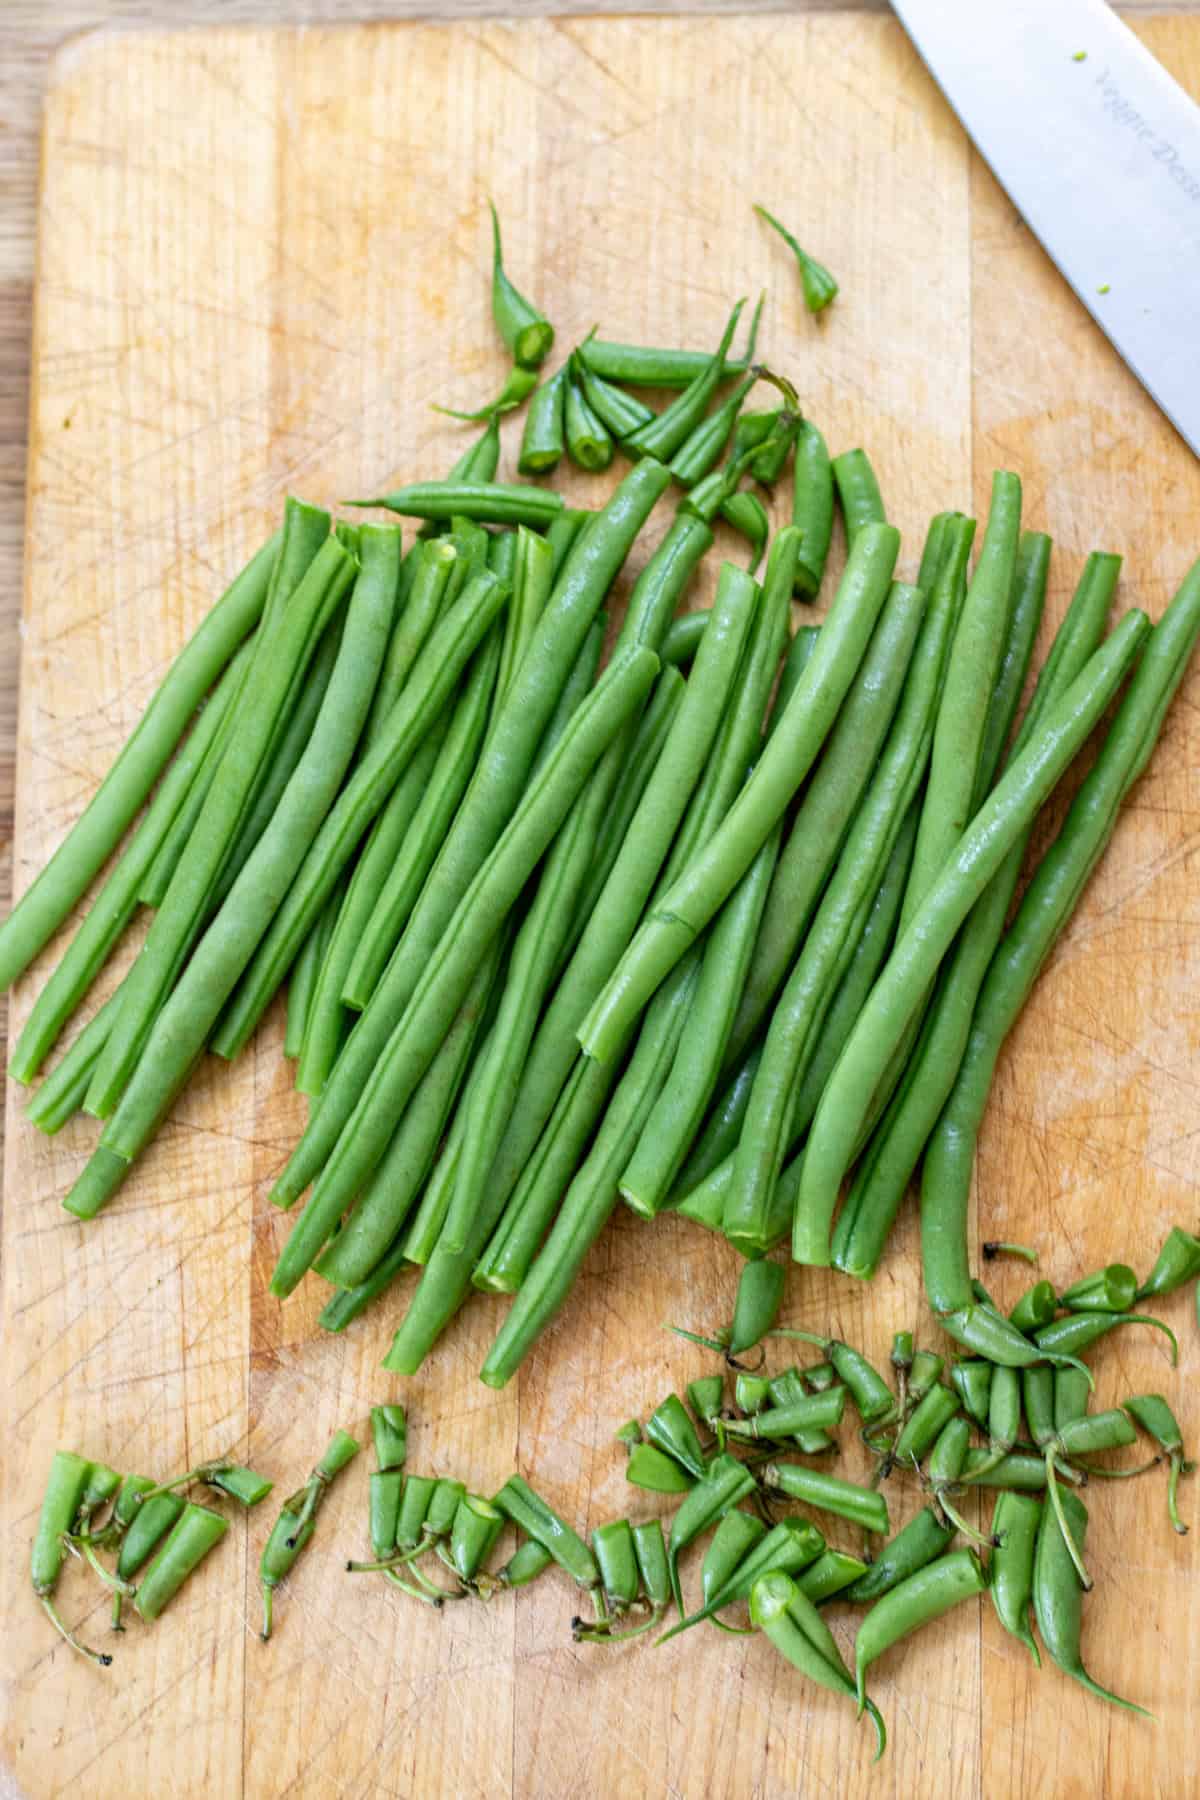 Trimming the green beans.